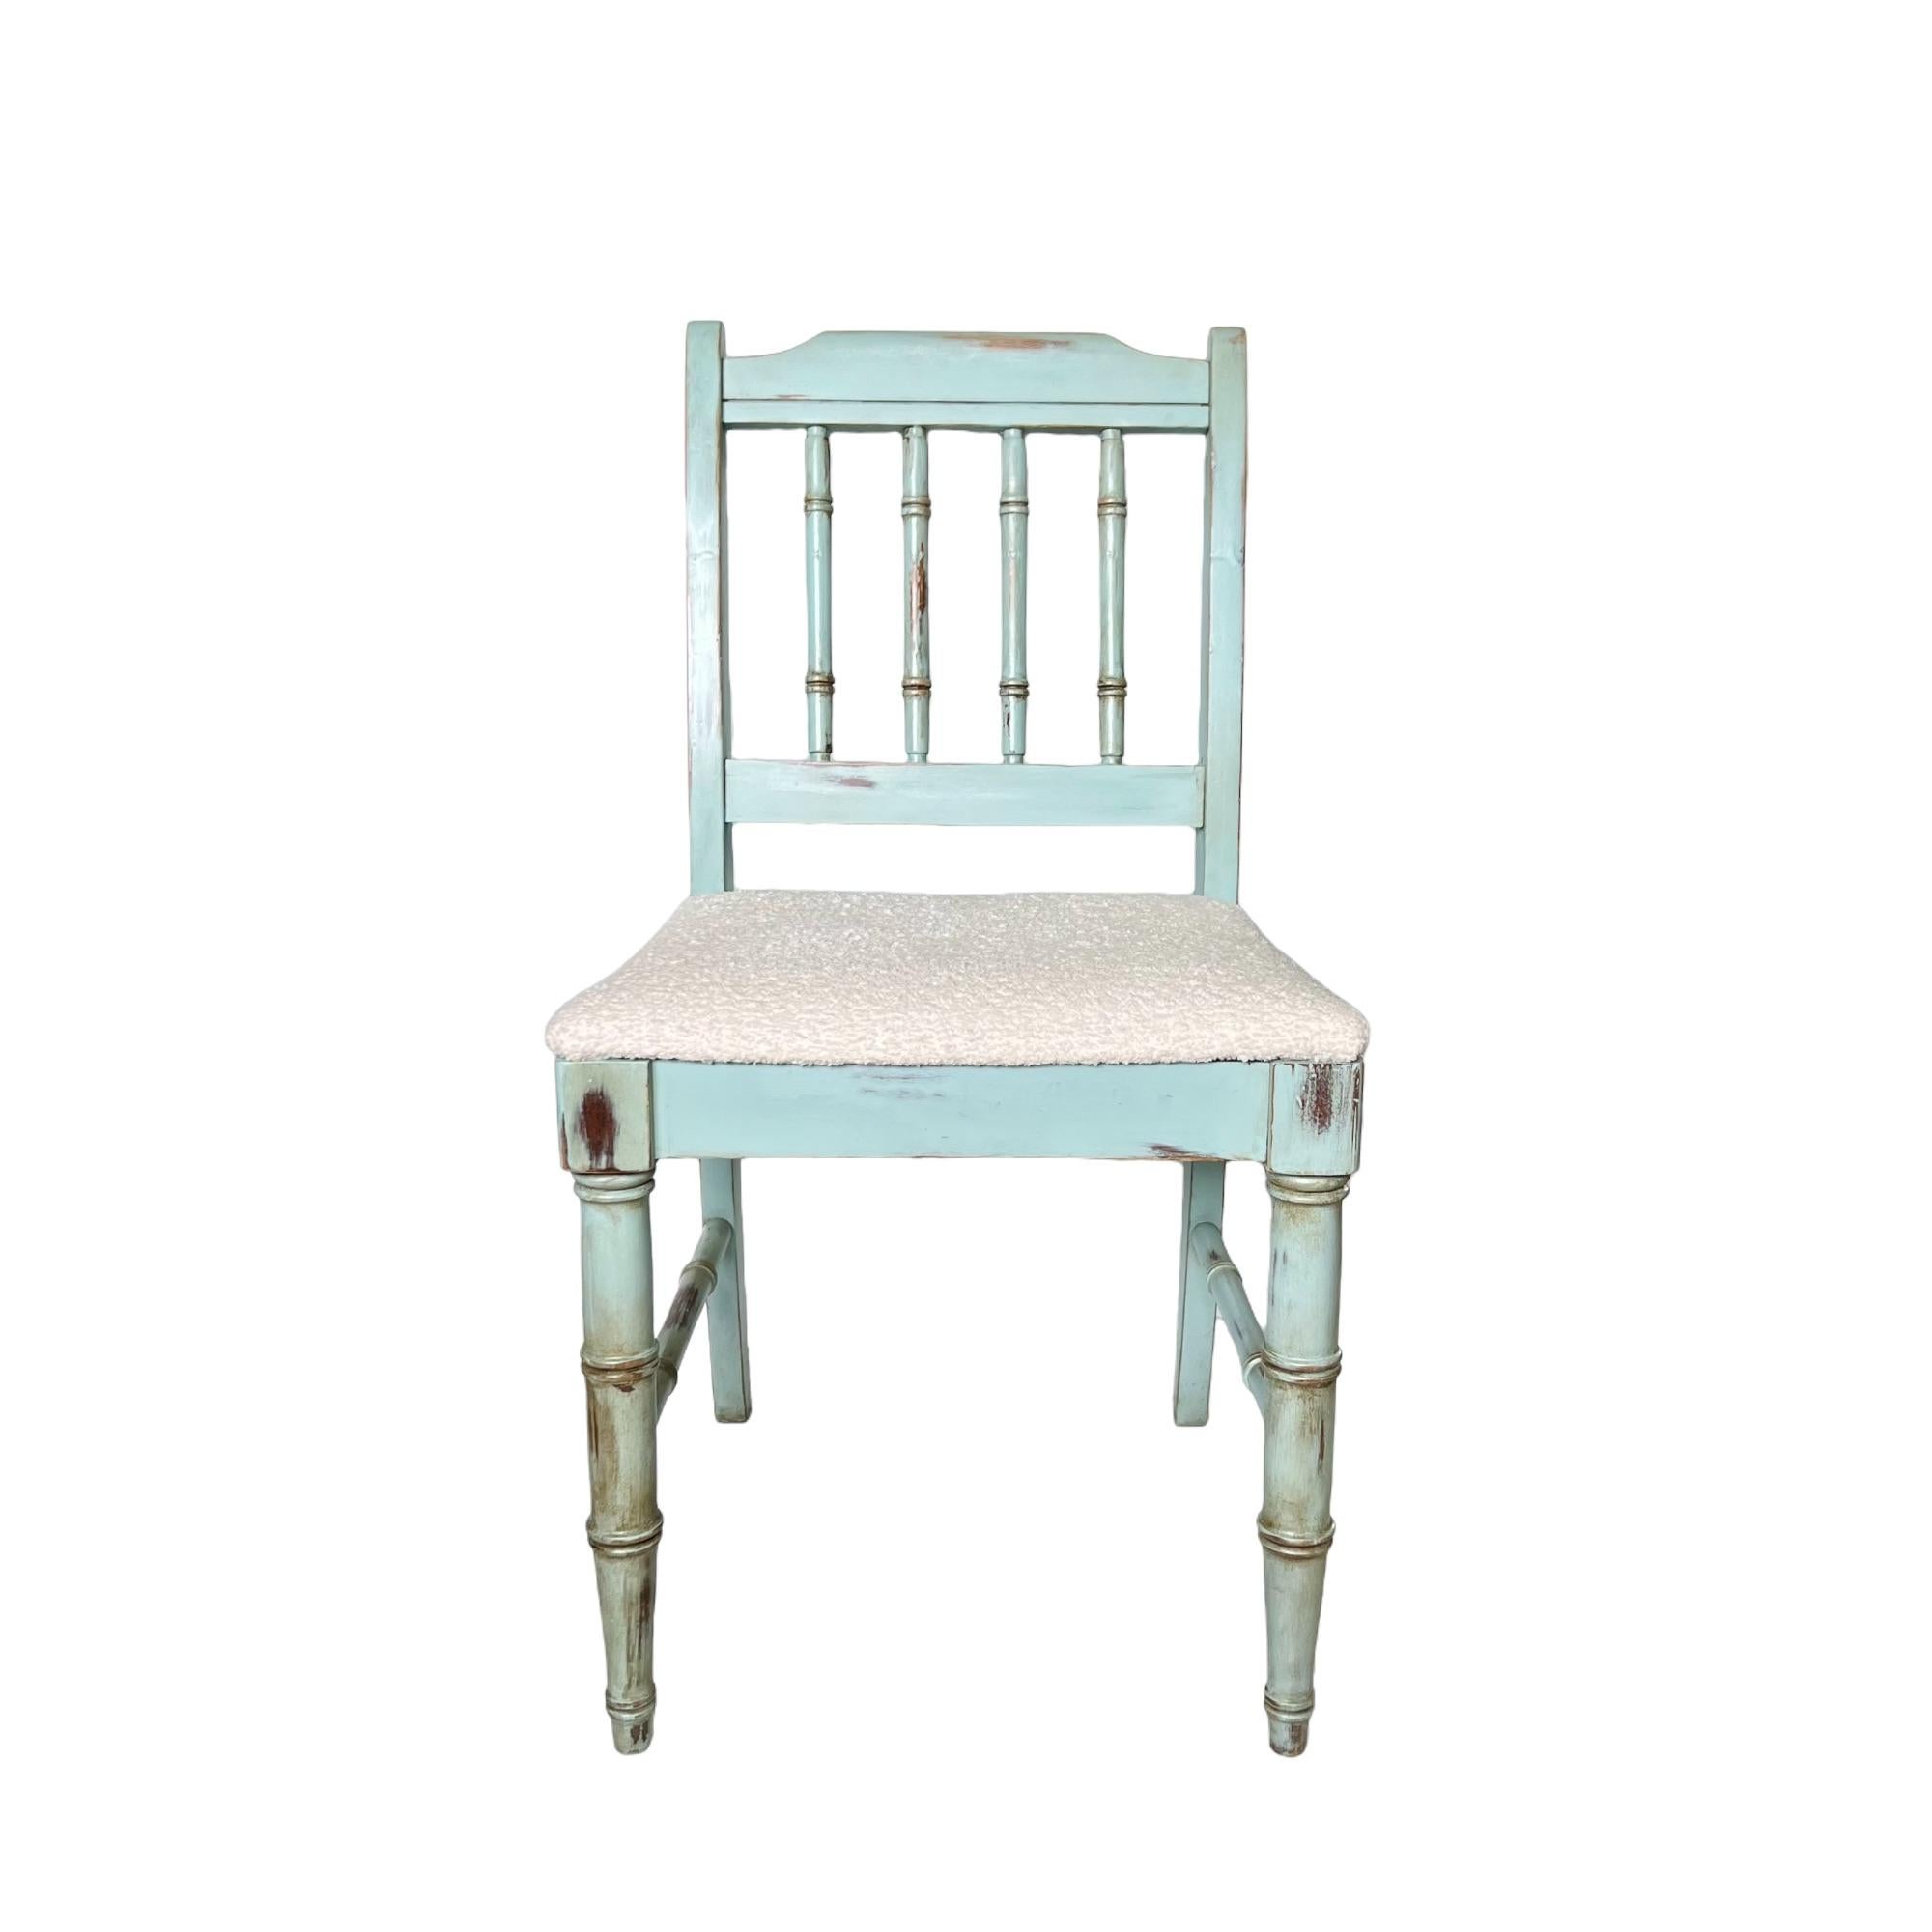 This vintage 1970's Palm Beach Regency faux bamboo small side or vanity chair by Dixie has been custom refinished in distressed (original dark wood shows through in places) satin light dusty blue with dark wax details and pearlescent highlights. It